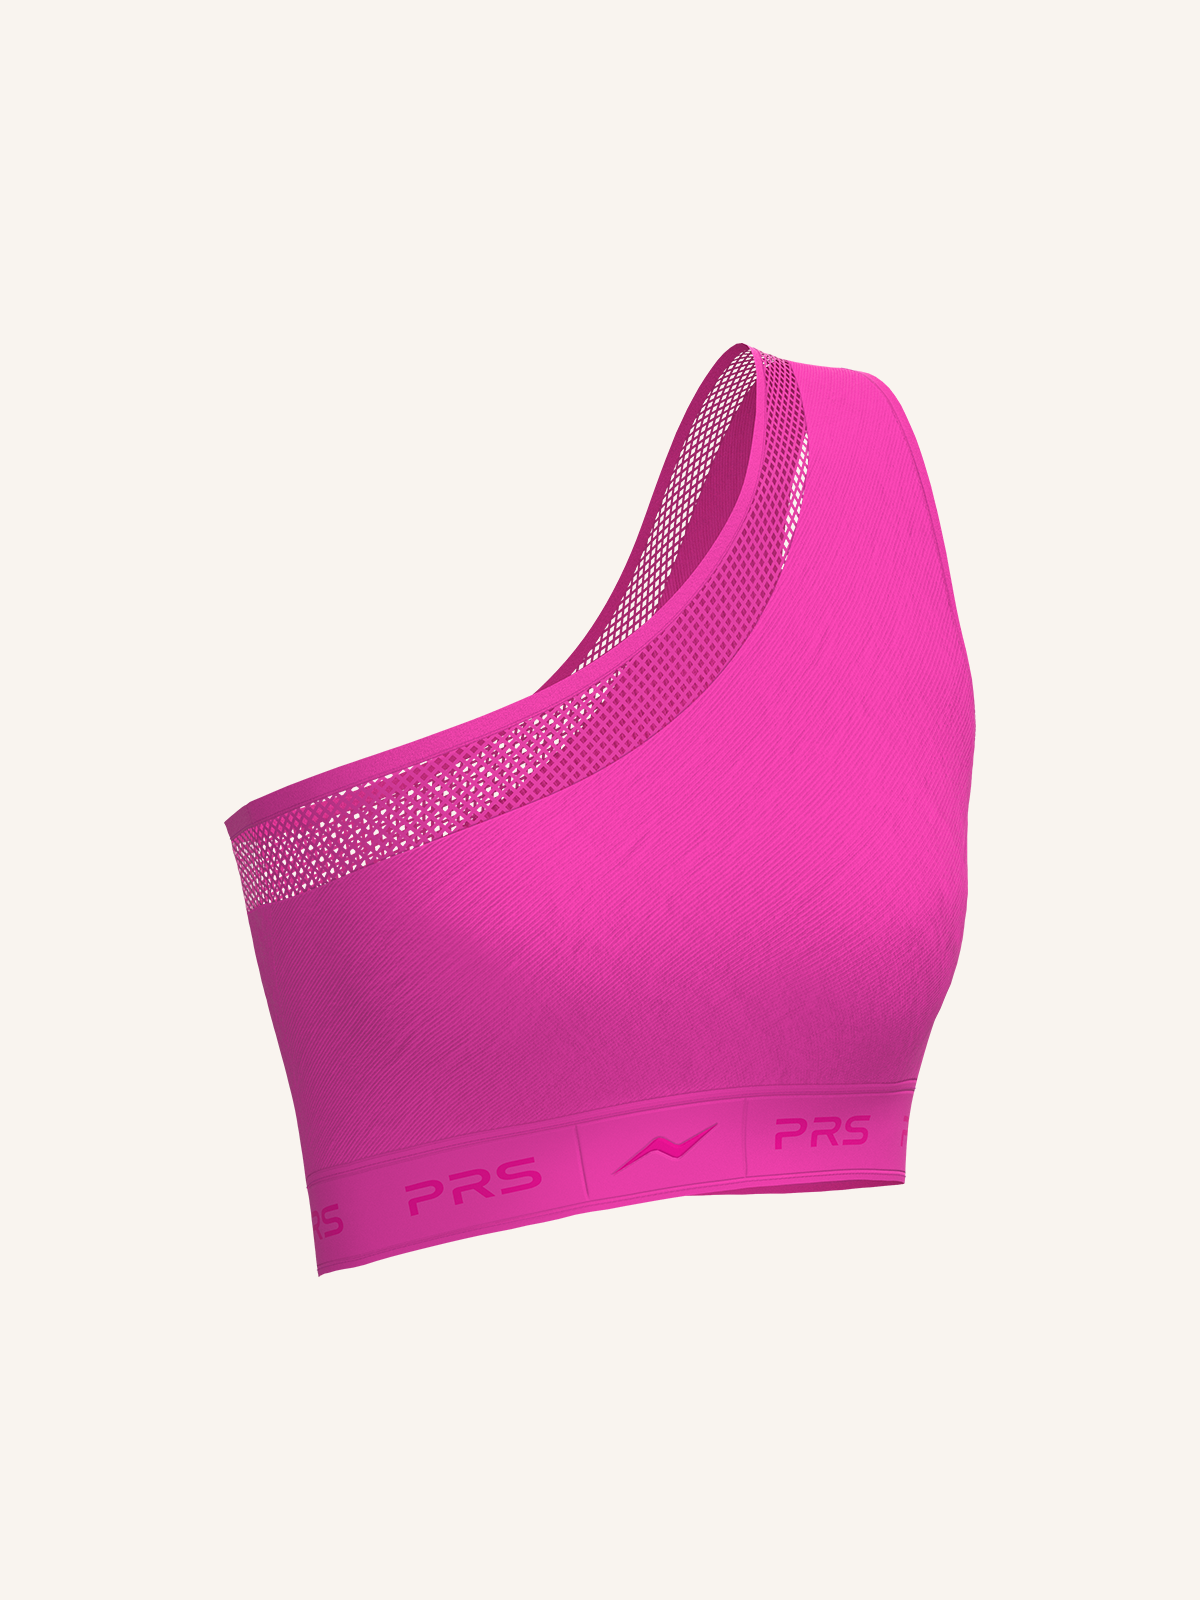 One Shoulder Running Top for Women | Single Pack | PRS PRO 500